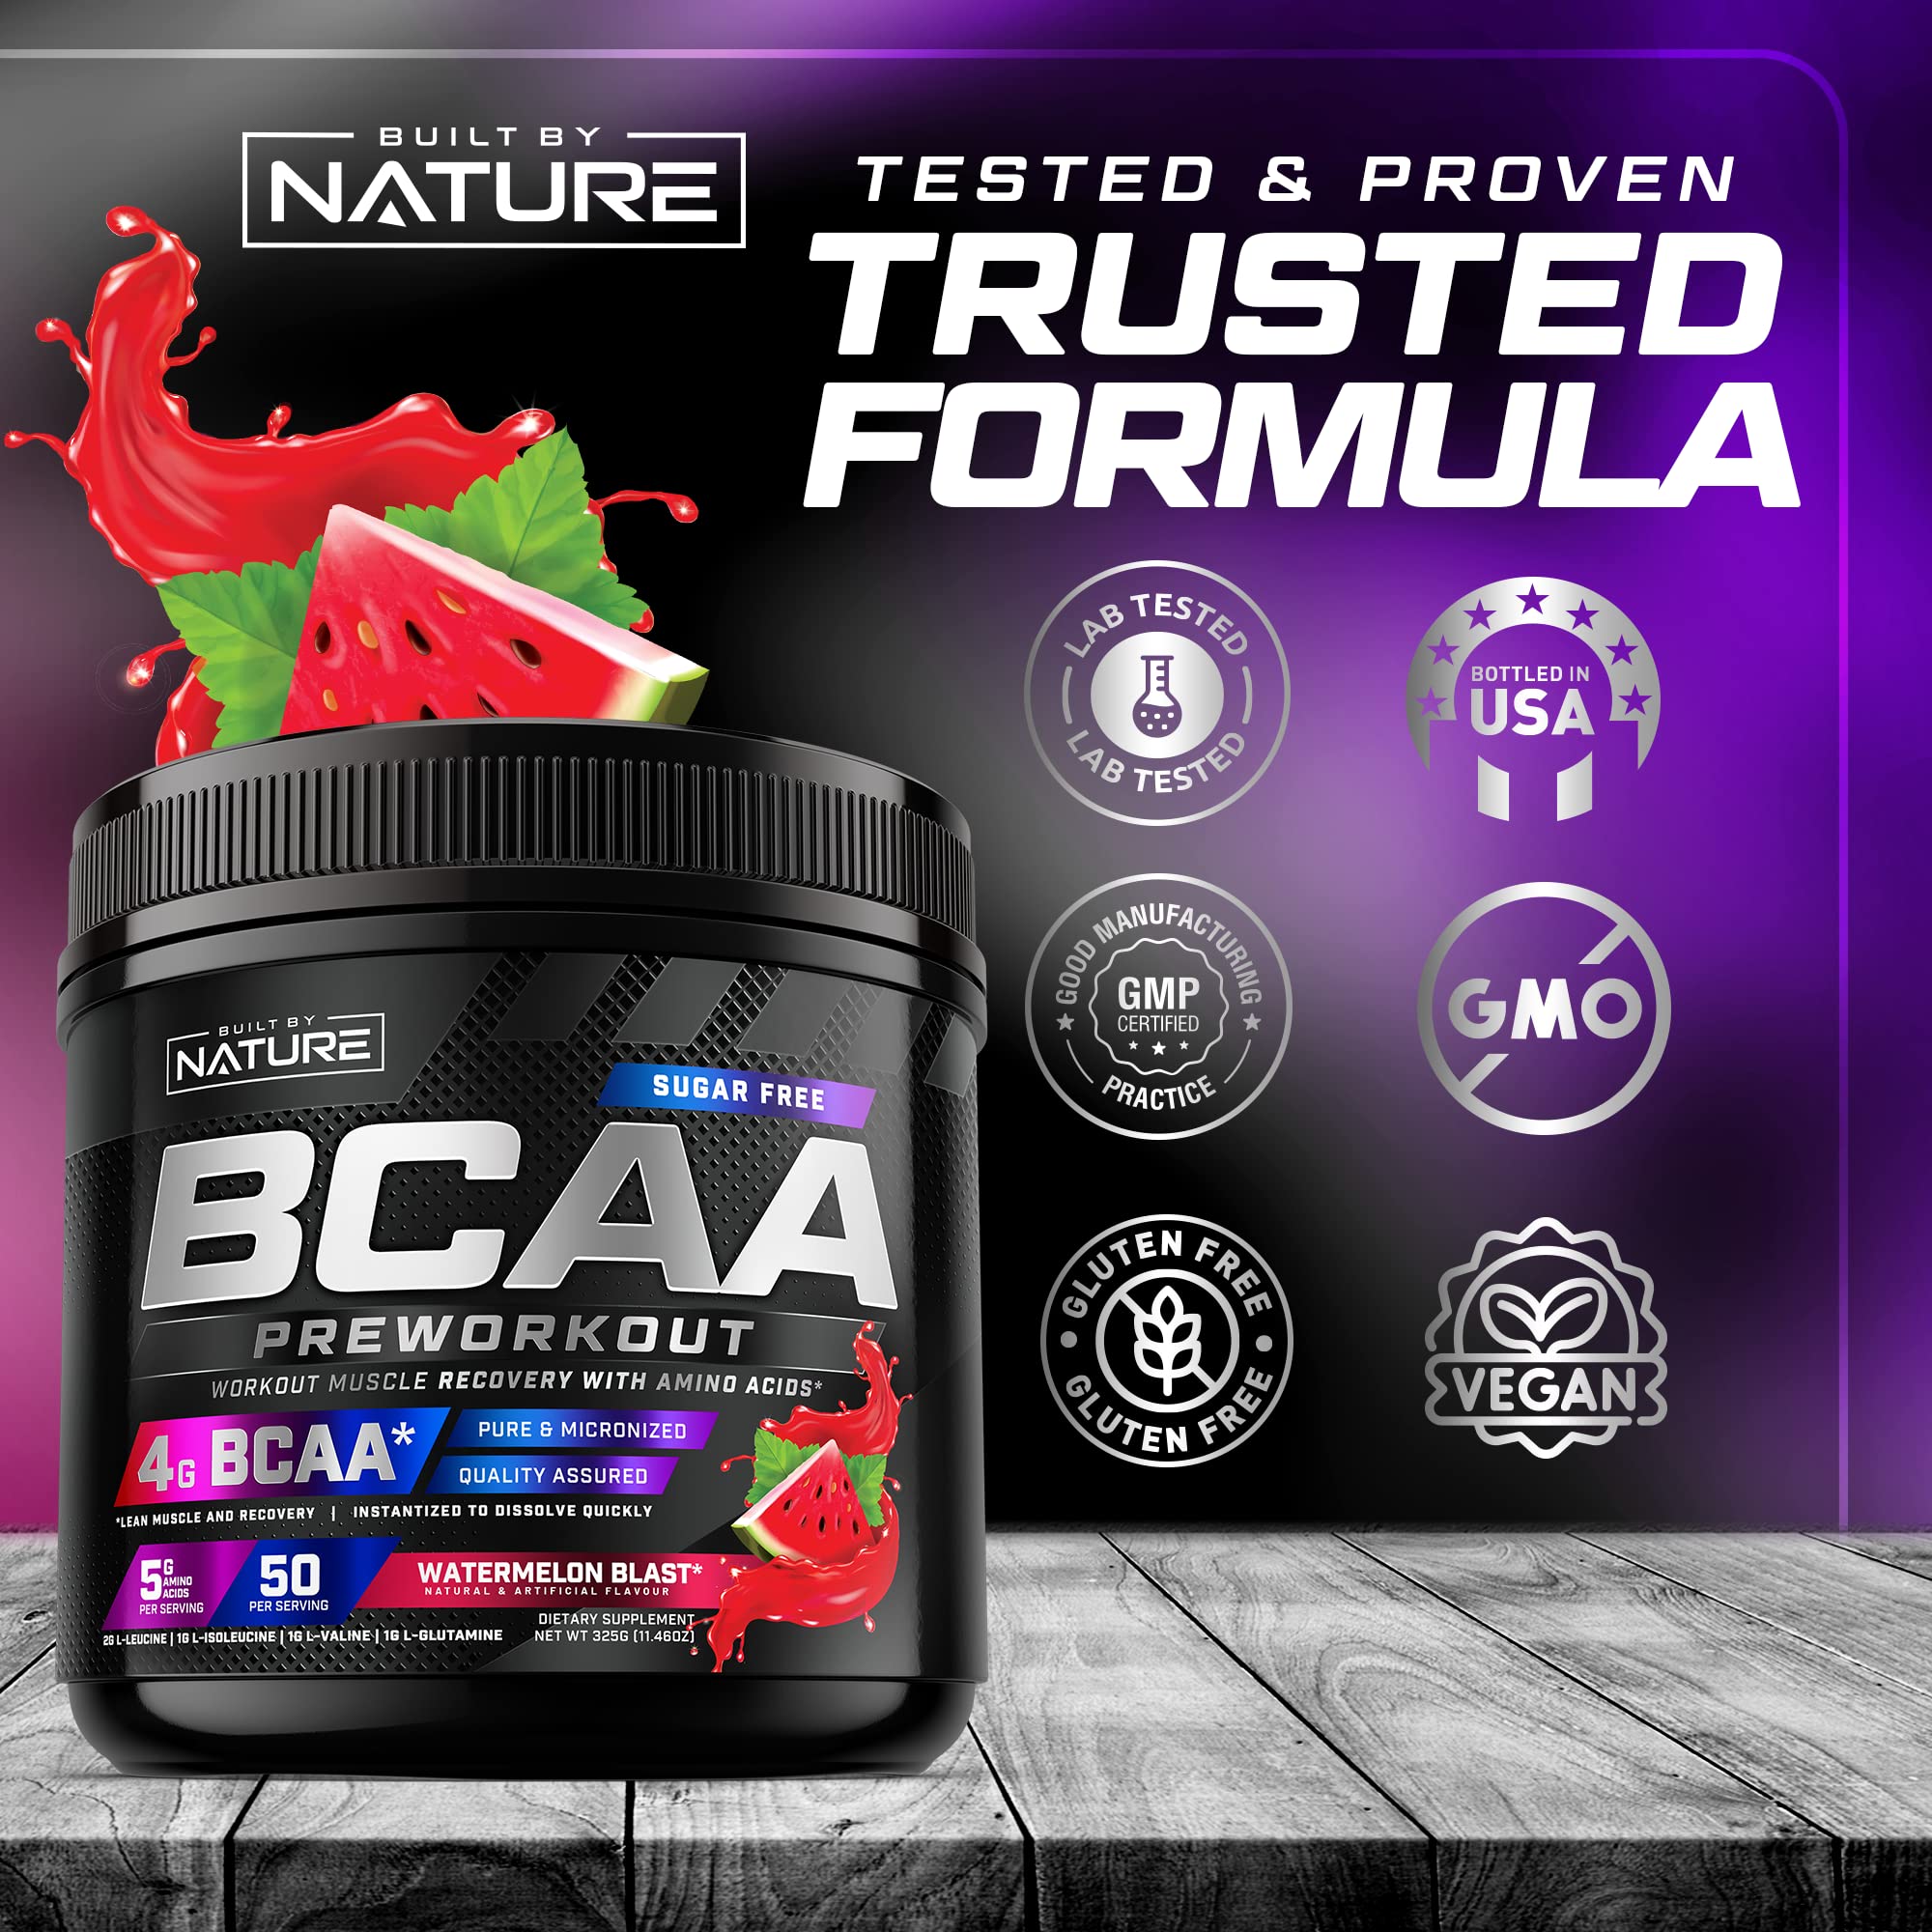 BCAA Powder - Post Workout Muscle Recovery & Hydration Supplement with Essential Amino Acids - Keto-Friendly, Sugar-Free - Watermelon Flavor - 4g BCAAs plus 1g Glutamine per Serving, 50 Servings